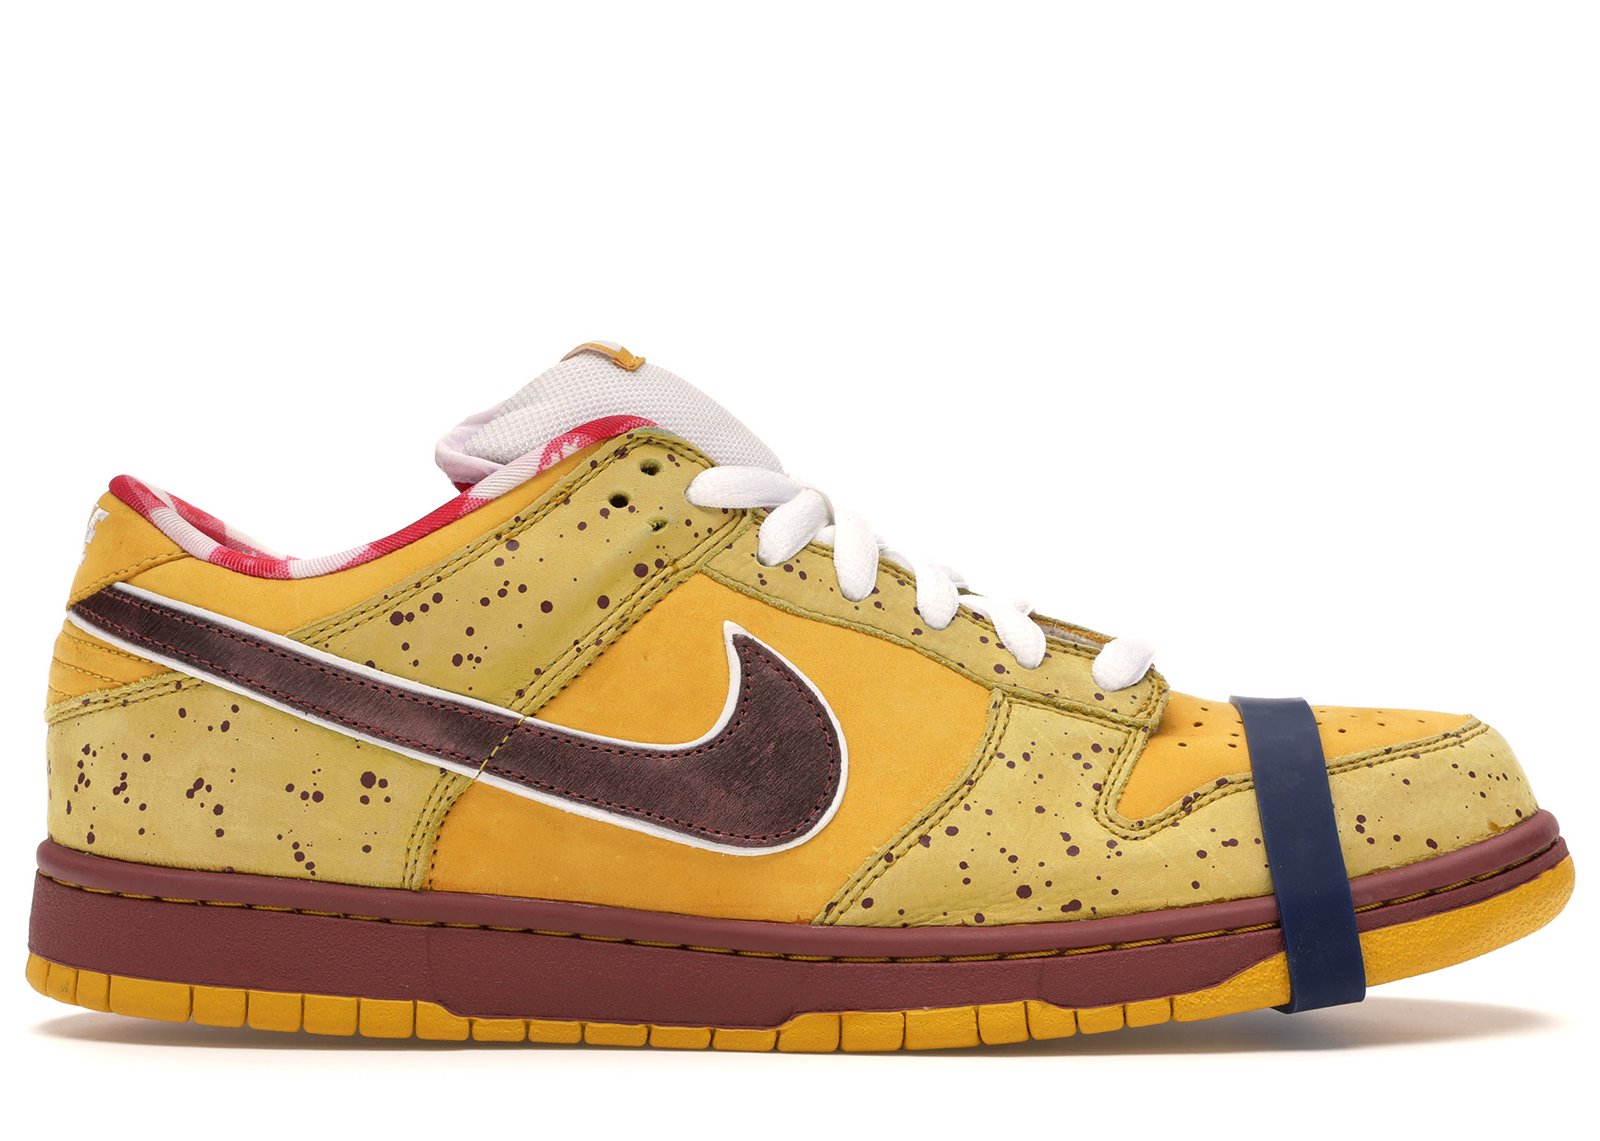 Nike Dunk SB Low Yellow Lobster sneakers